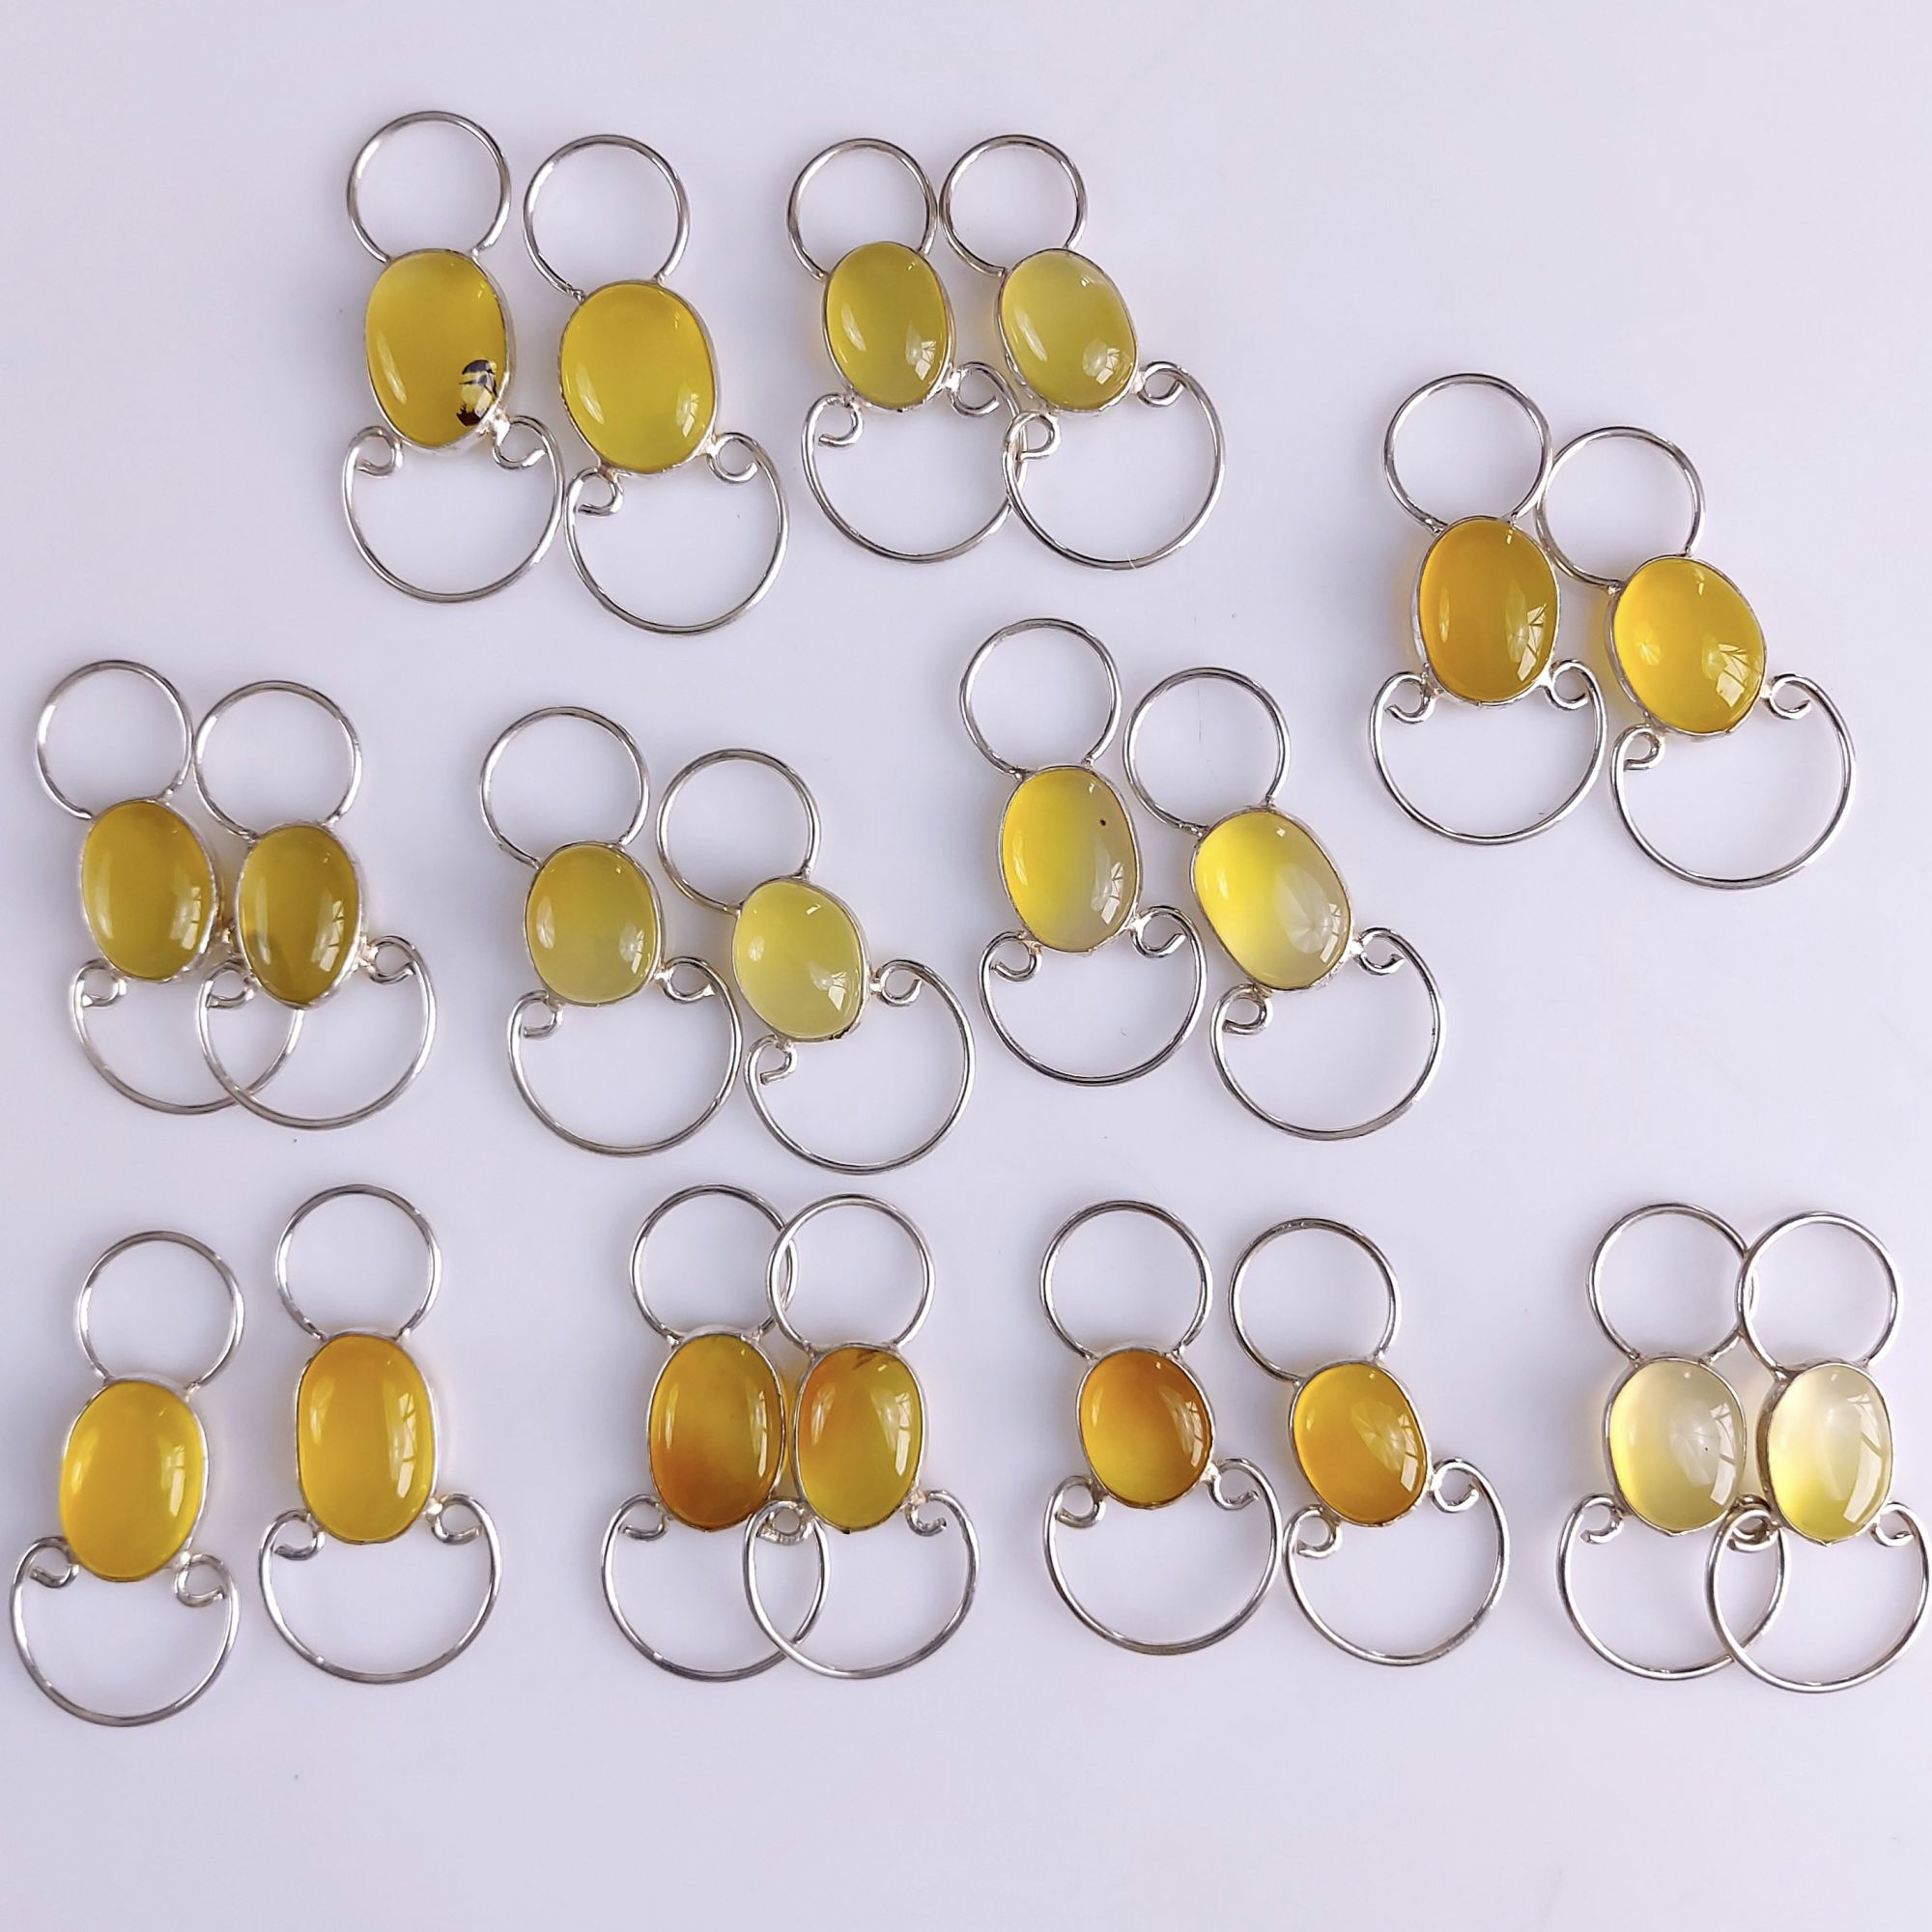 10Pair 319Cts Natural Yellow Onyx Gemstone Silver Plated Earring Pair Connector Lot 13x10mm#564